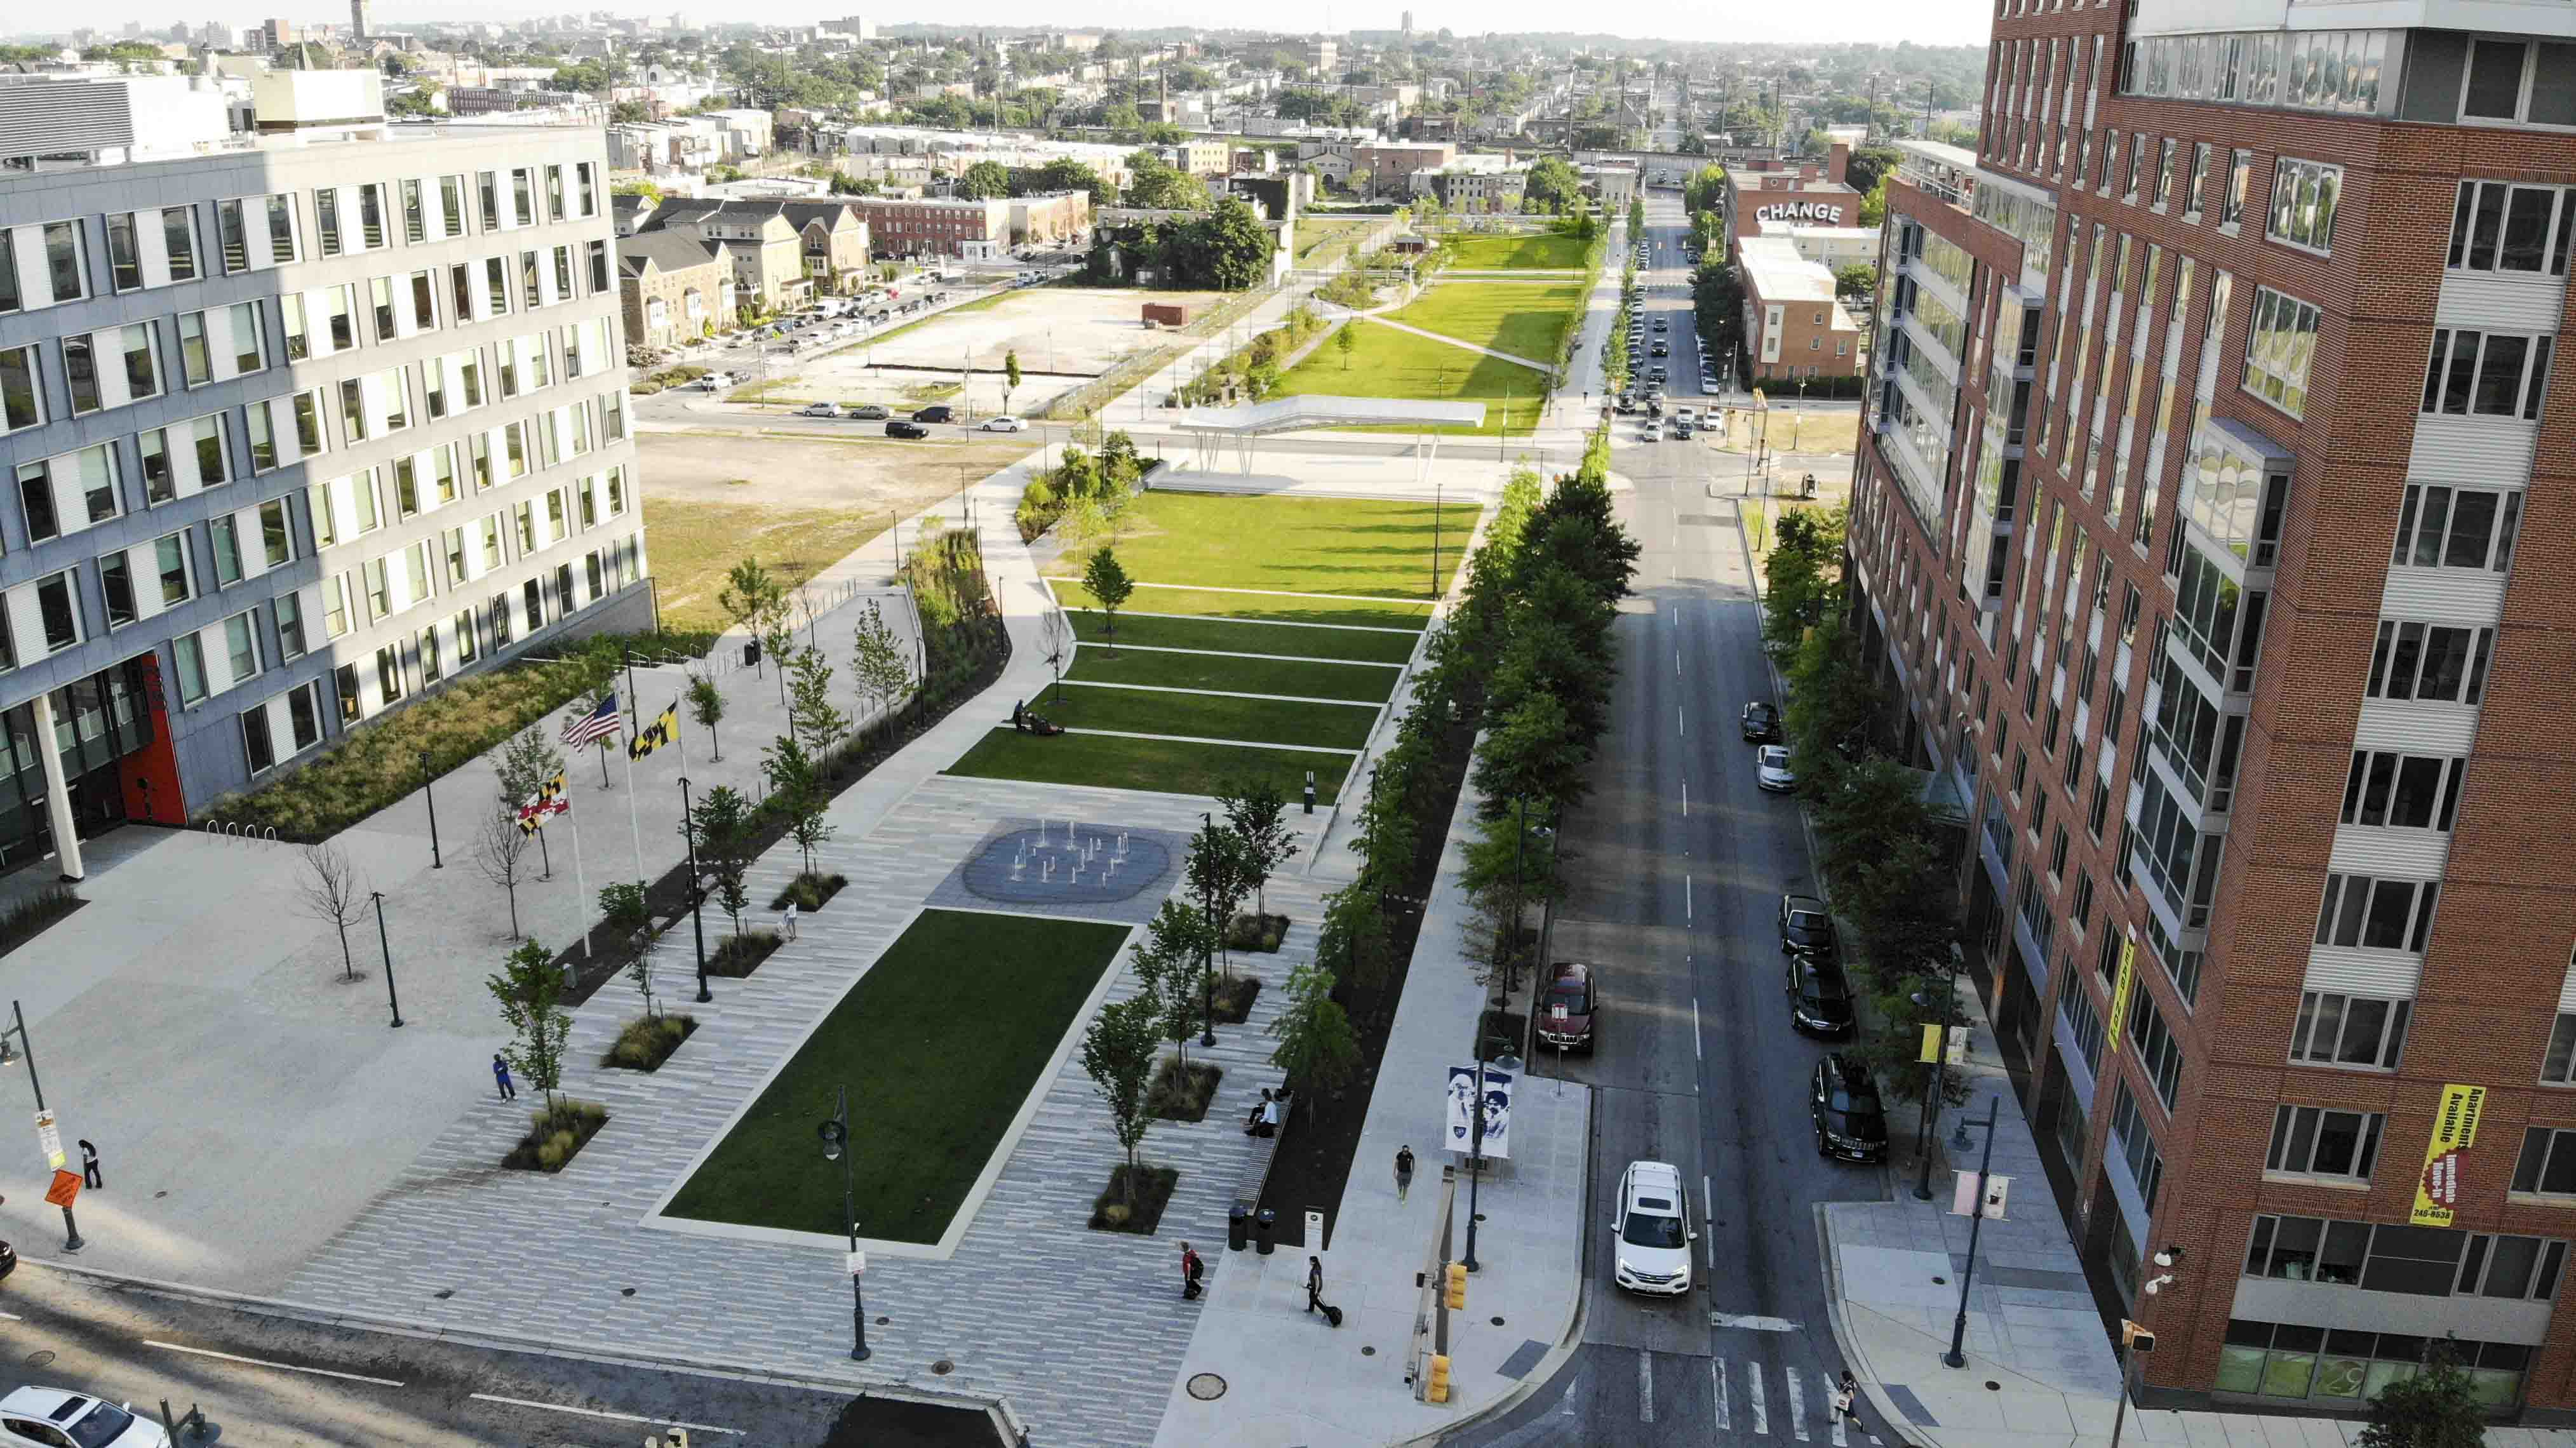 Picture of Eager Park, designed by Mahan Rykiel Associates Landscape Architecture, Urban Design and Planning.